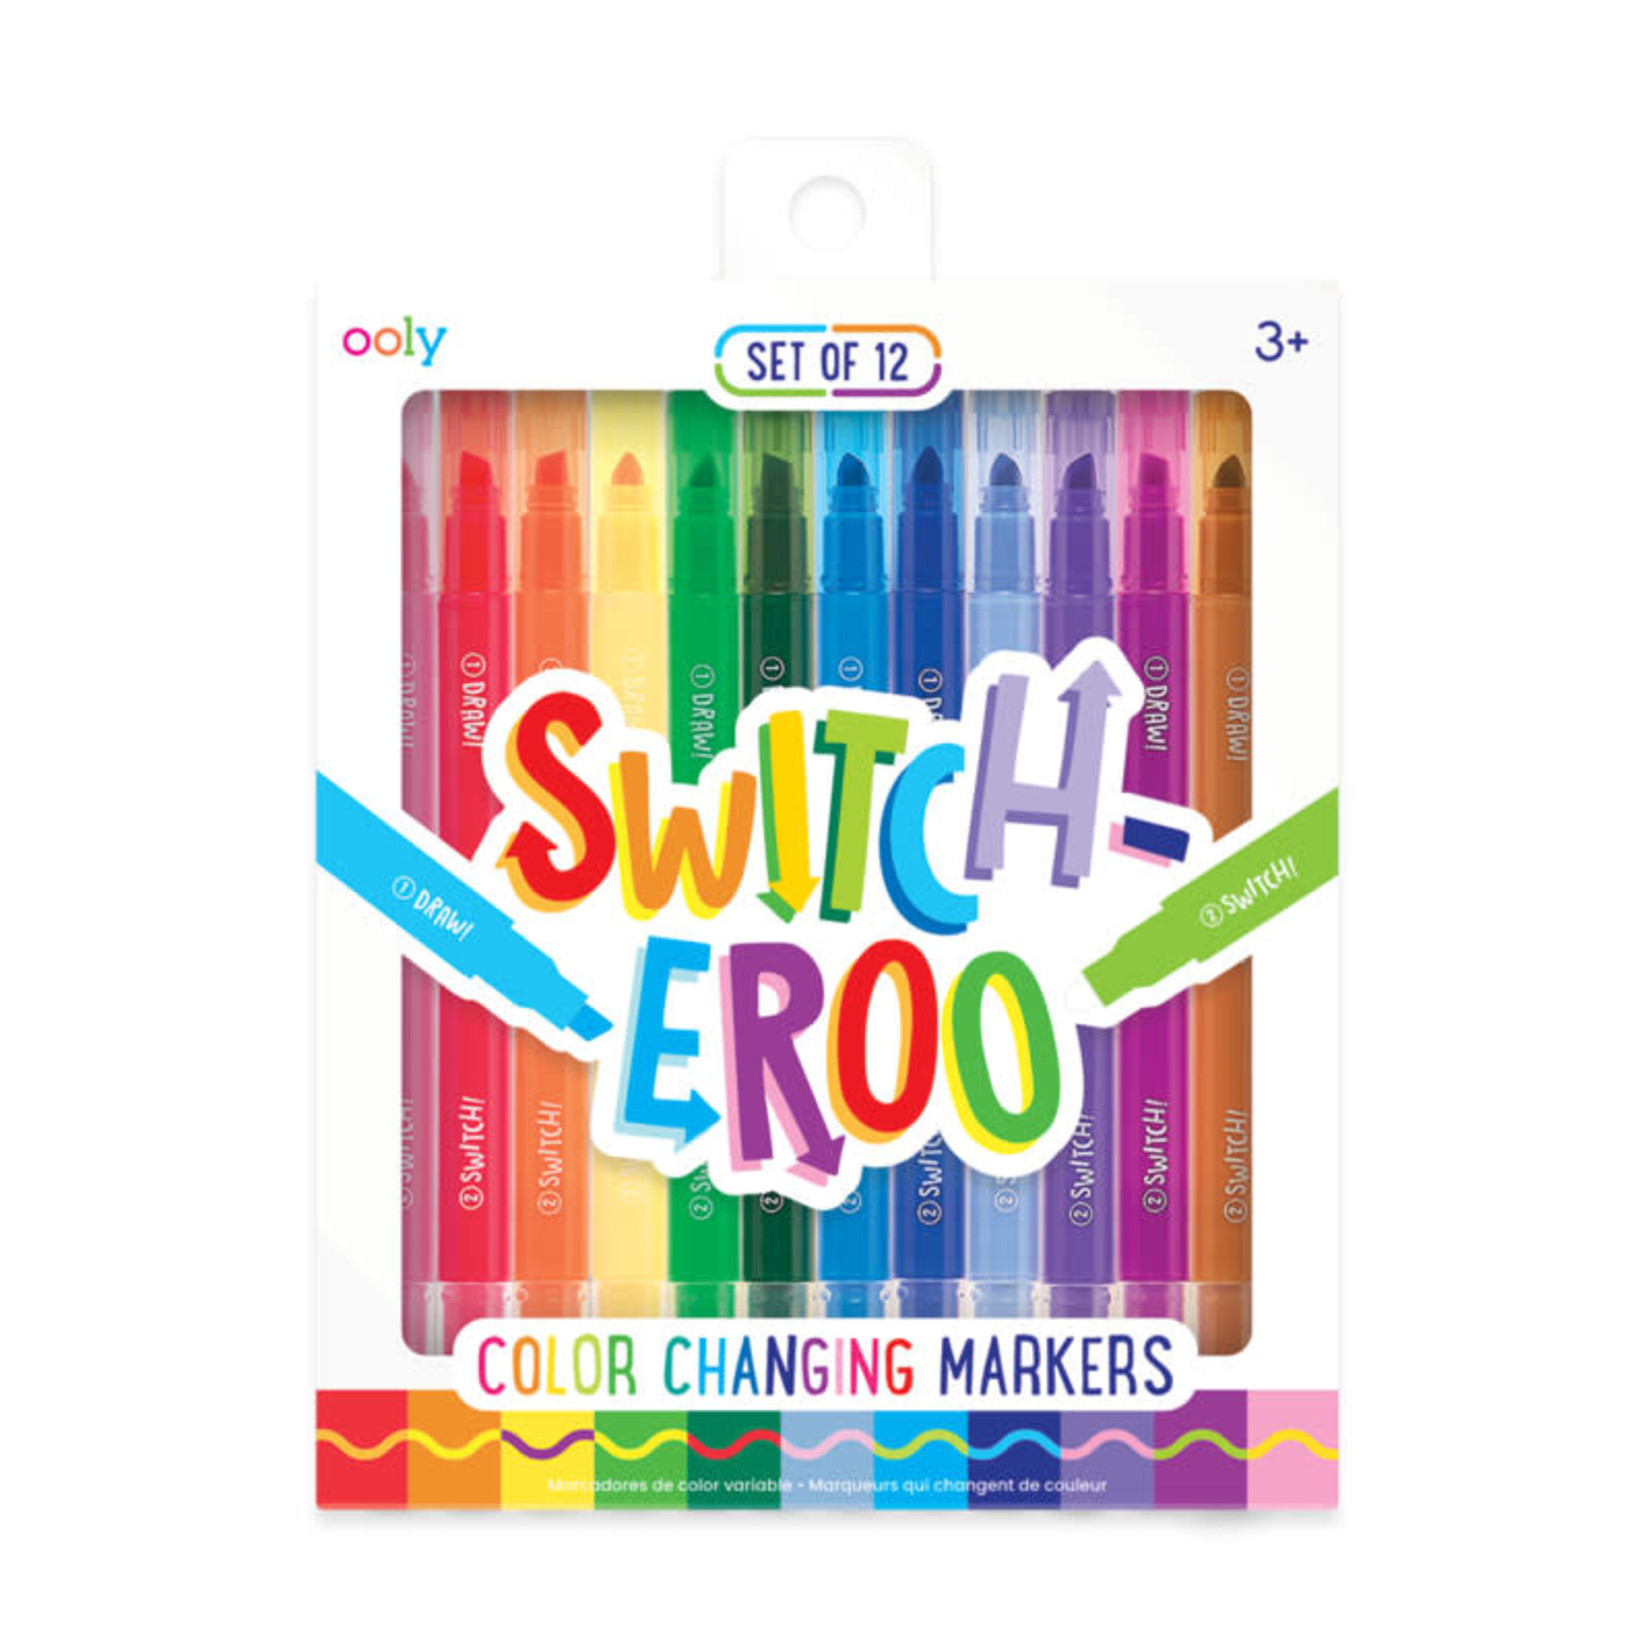 Ooly Switch-Eroo Color Changing Markers, 12 Pk